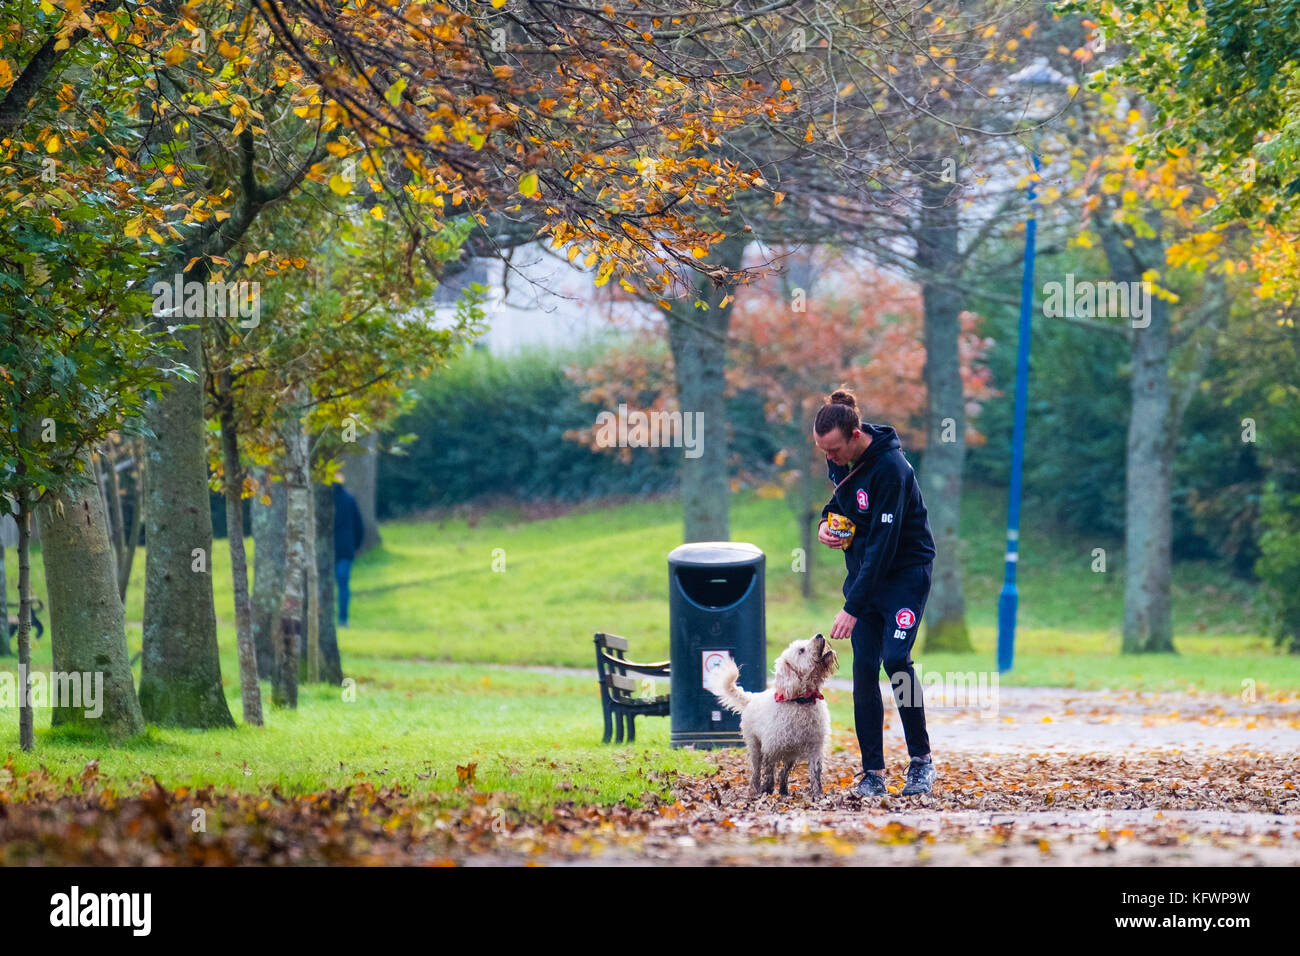 Aberystwyth Wales UK, Wednesday 1 November 2017 UK weather: People walking along Plascrug Avenue in Aberystwyth on the first day of November, with all the deciduous trees shedding their leaves in a myriad of rich autumnal colours photo Credit: Keith Morris/Alamy Live News Stock Photo